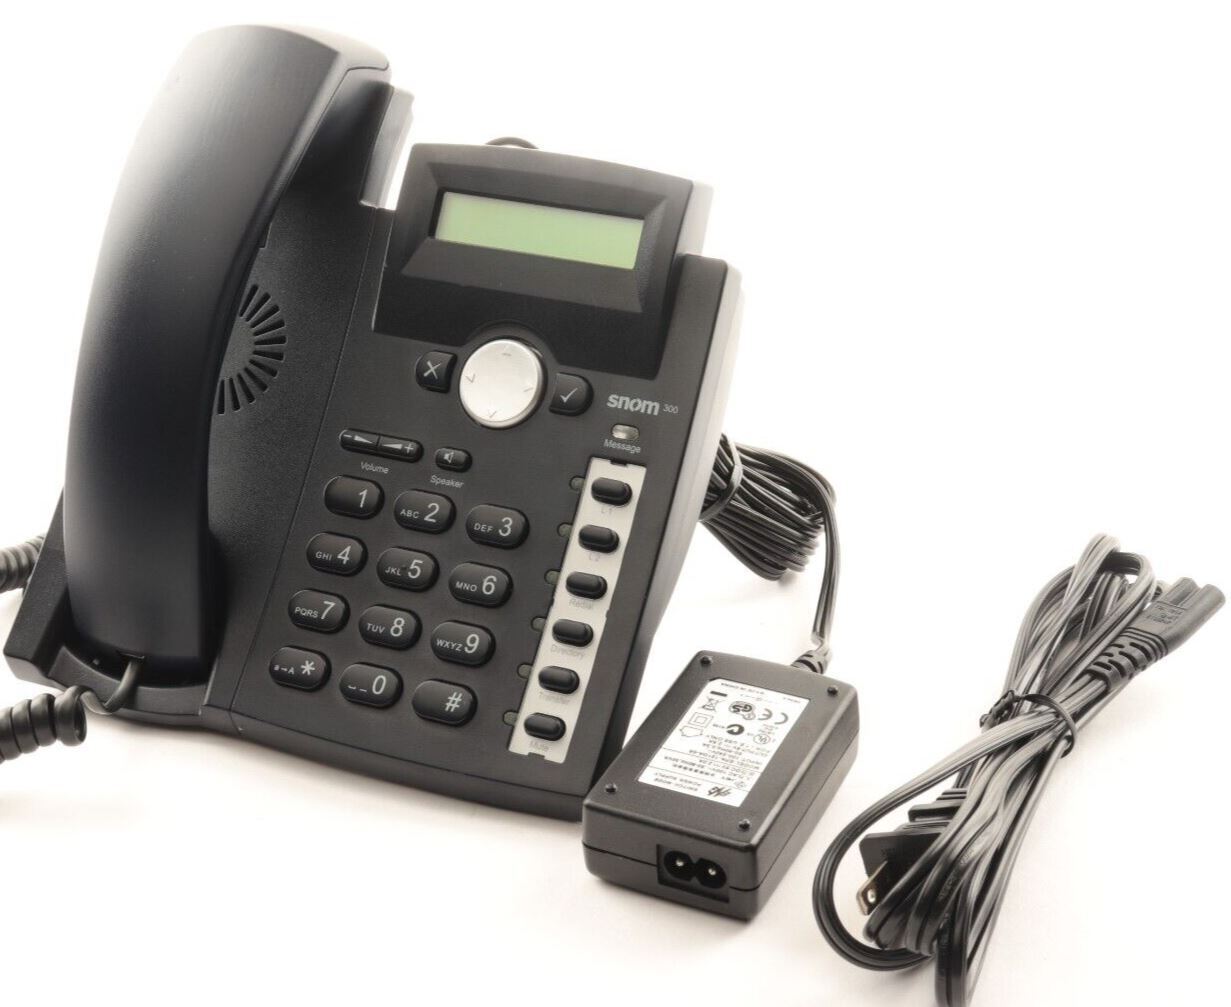 SNOM 300 VoIP Business Corded Phone GUARANTEED TESTED AS SHOWN 163121129903